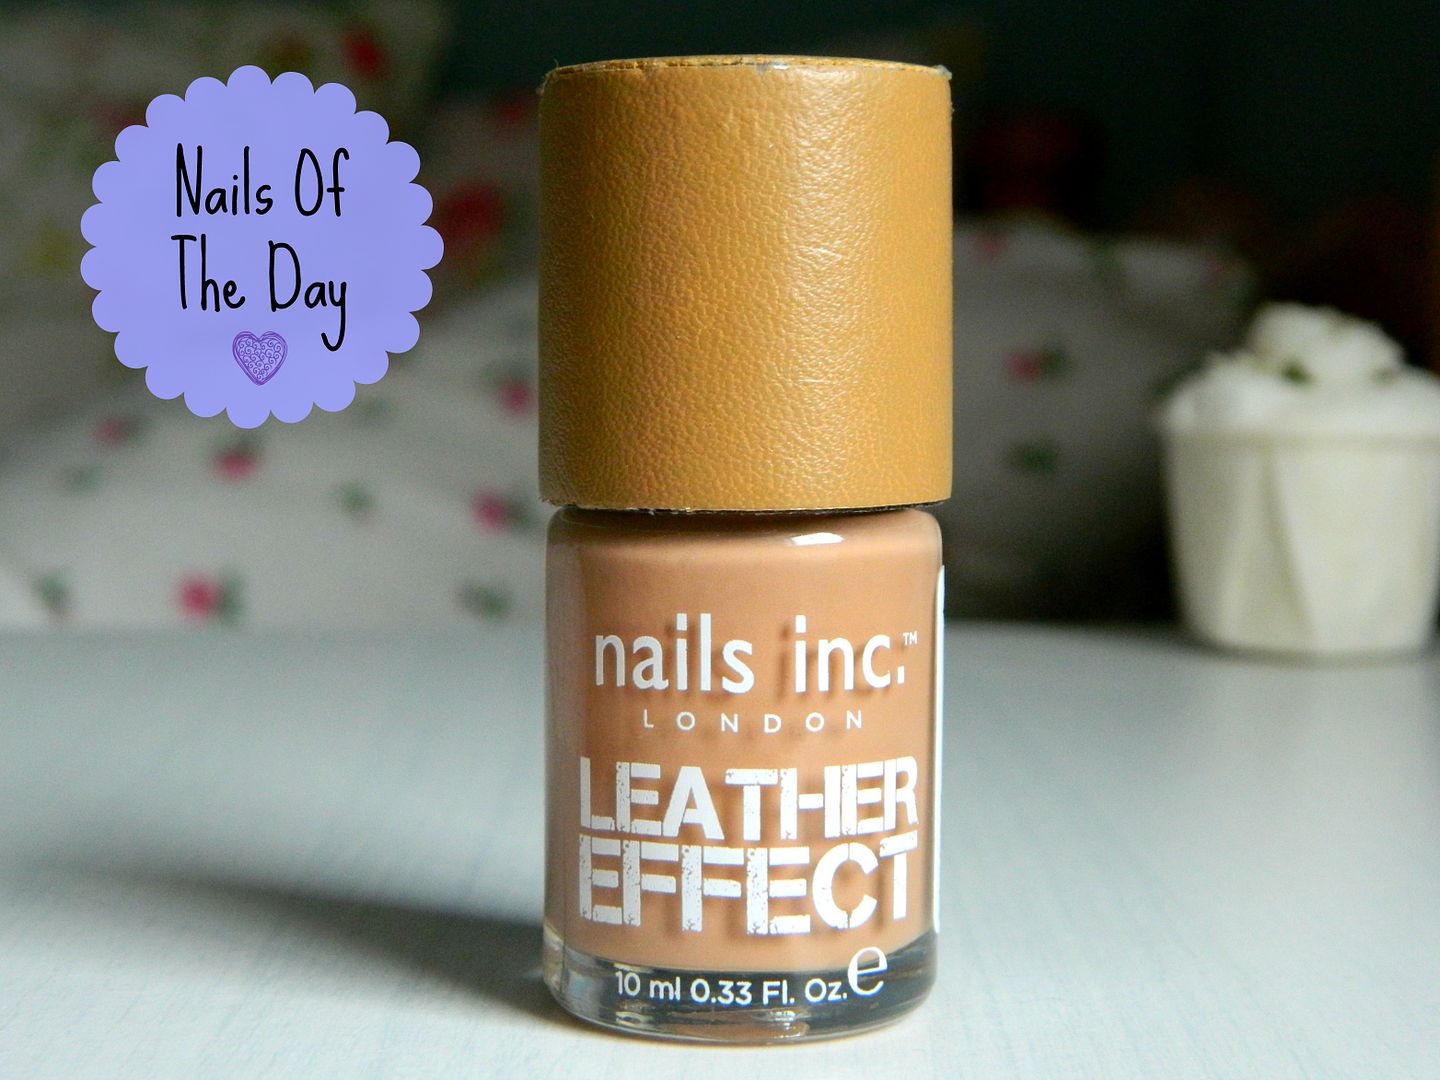 Nails Of The Day Nails Inc Leather Effect Soho Mews Nail Polish Review Belle-amie